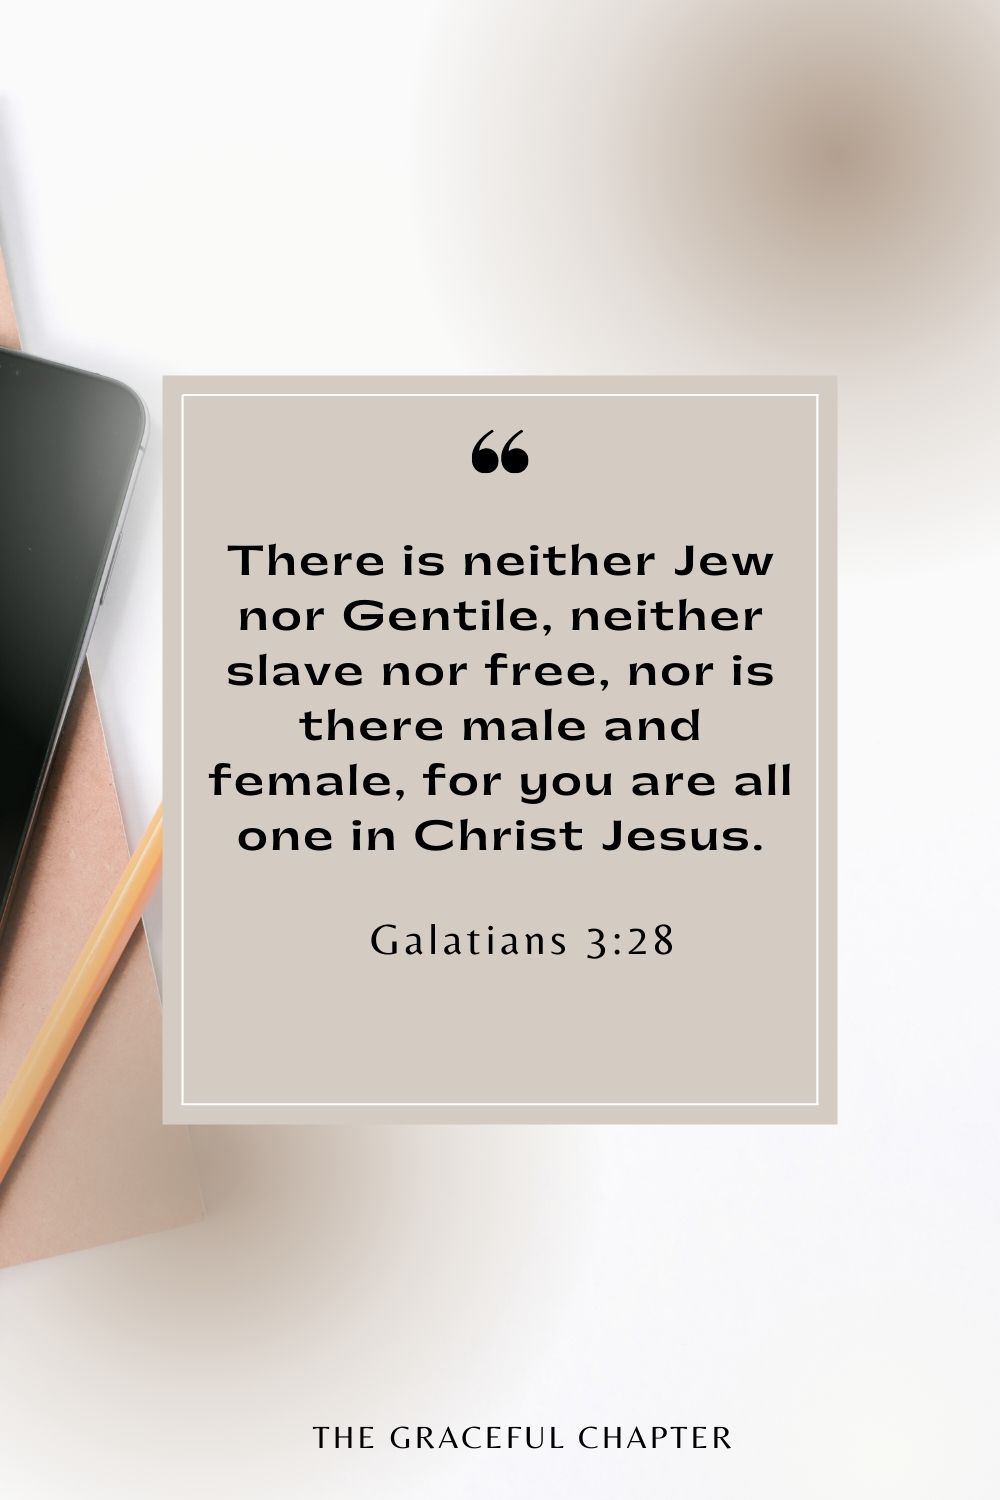 There is neither Jew nor Gentile, neither slave nor free, nor is there male and female, for you are all one in Christ Jesus. Galatians 3:28